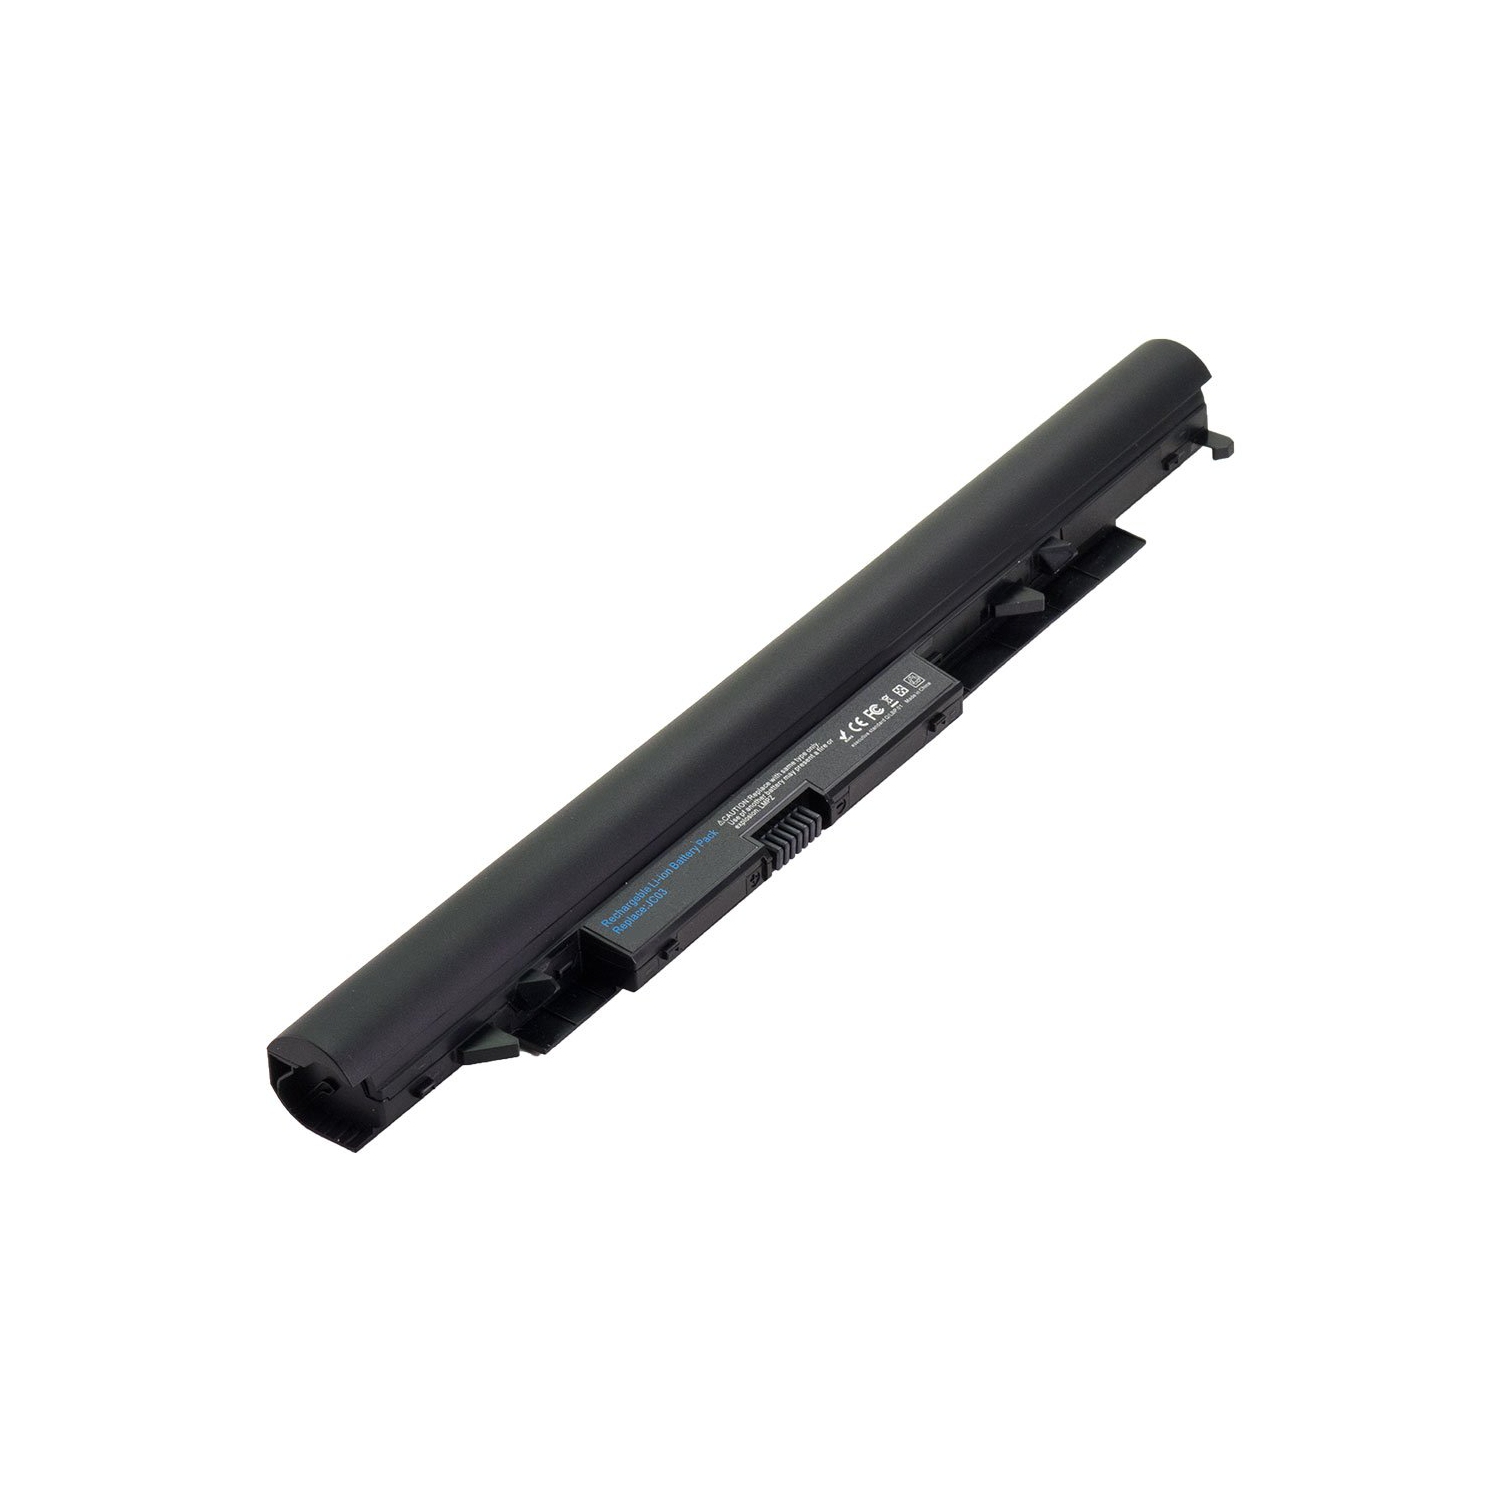 Laptop Battery Replacement for HP 245 G5 Y0T72PA, 2LP34AA, 919682-421, HSTNN-DB8A, JC03, JCO4, TPN-Q186, TPN-W130